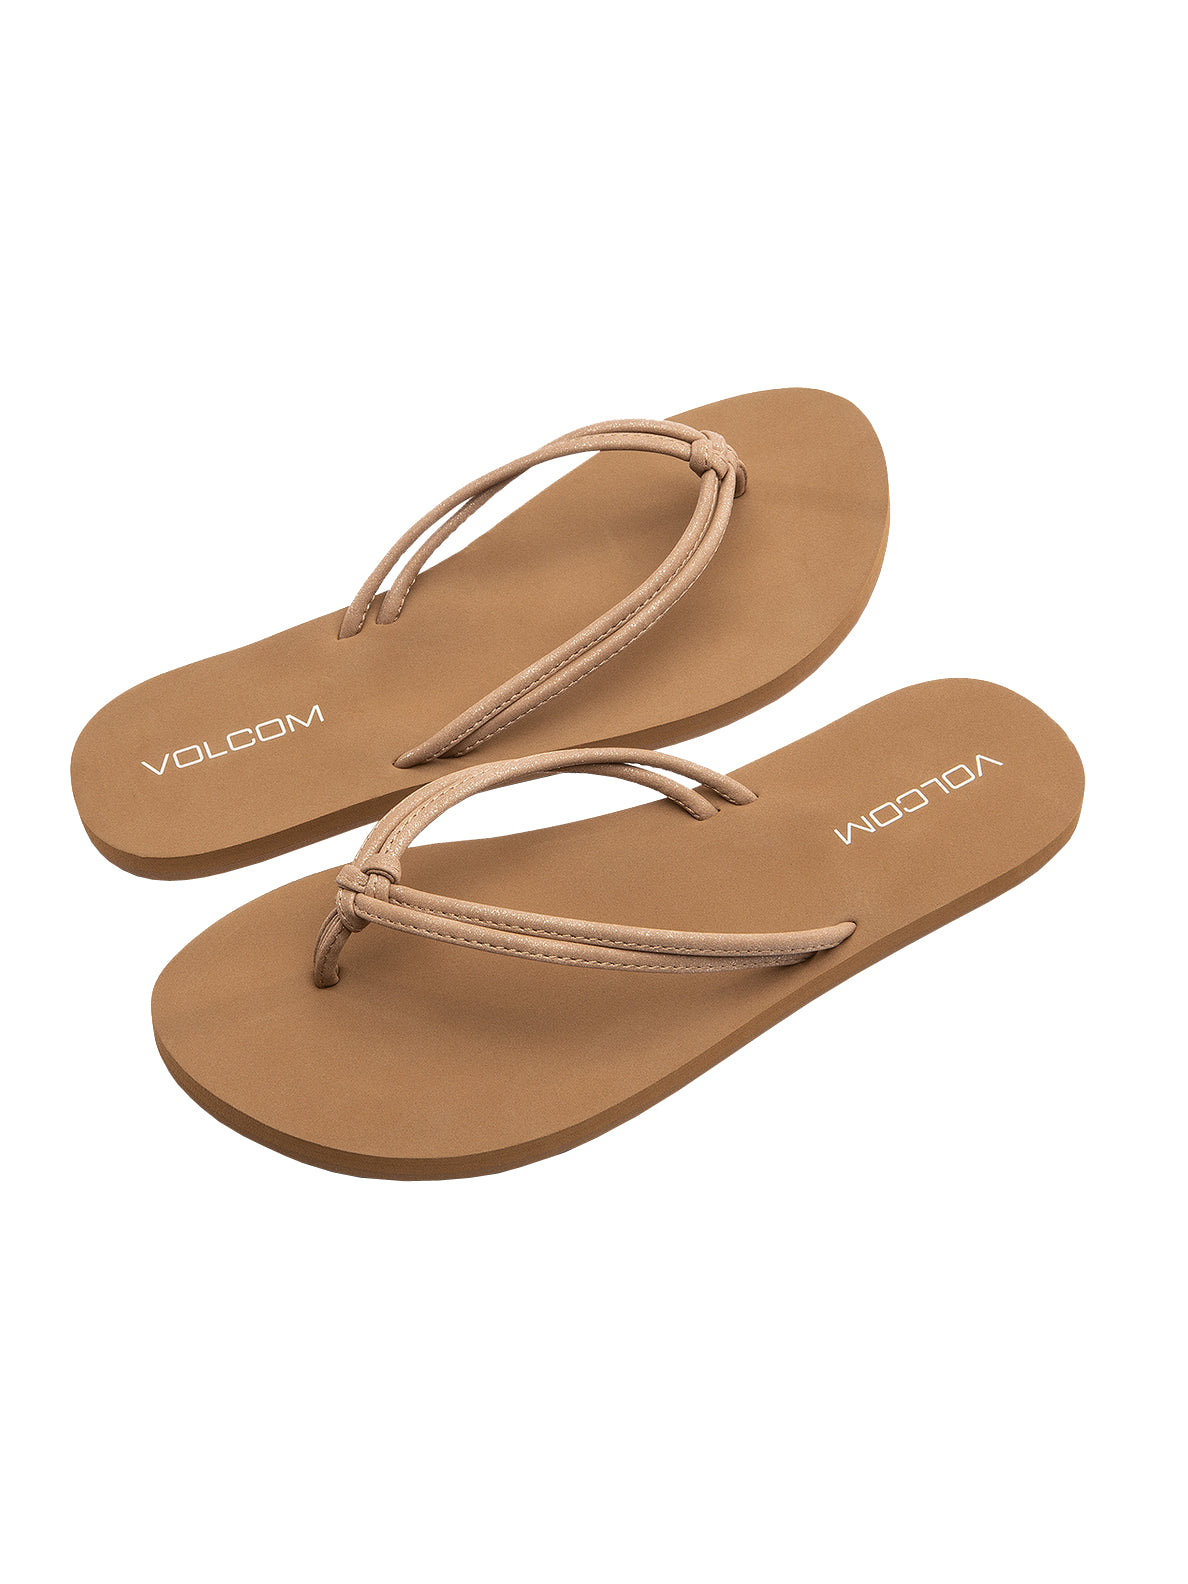 Volcom Forever and Ever 2 Womens Sandal TAN23-Tan 6